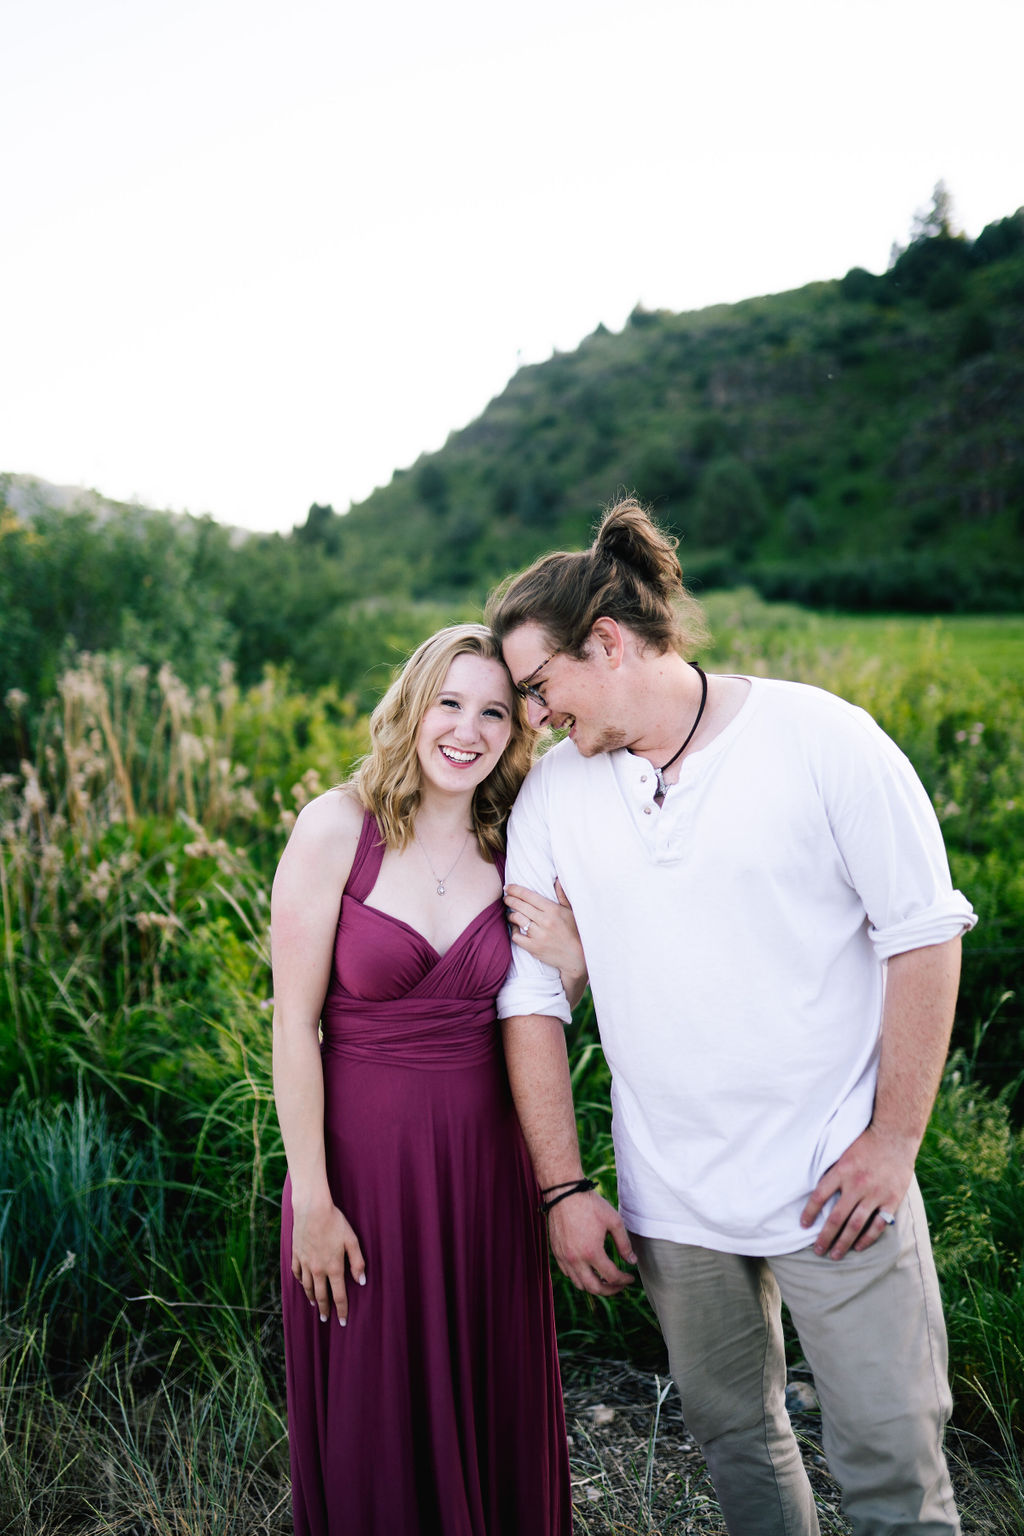 engaged couple stand together in a stunning green field and smile at the camera for their engagement photos with woma nin a purple dress and man in a white shirt looking romantically at the woman